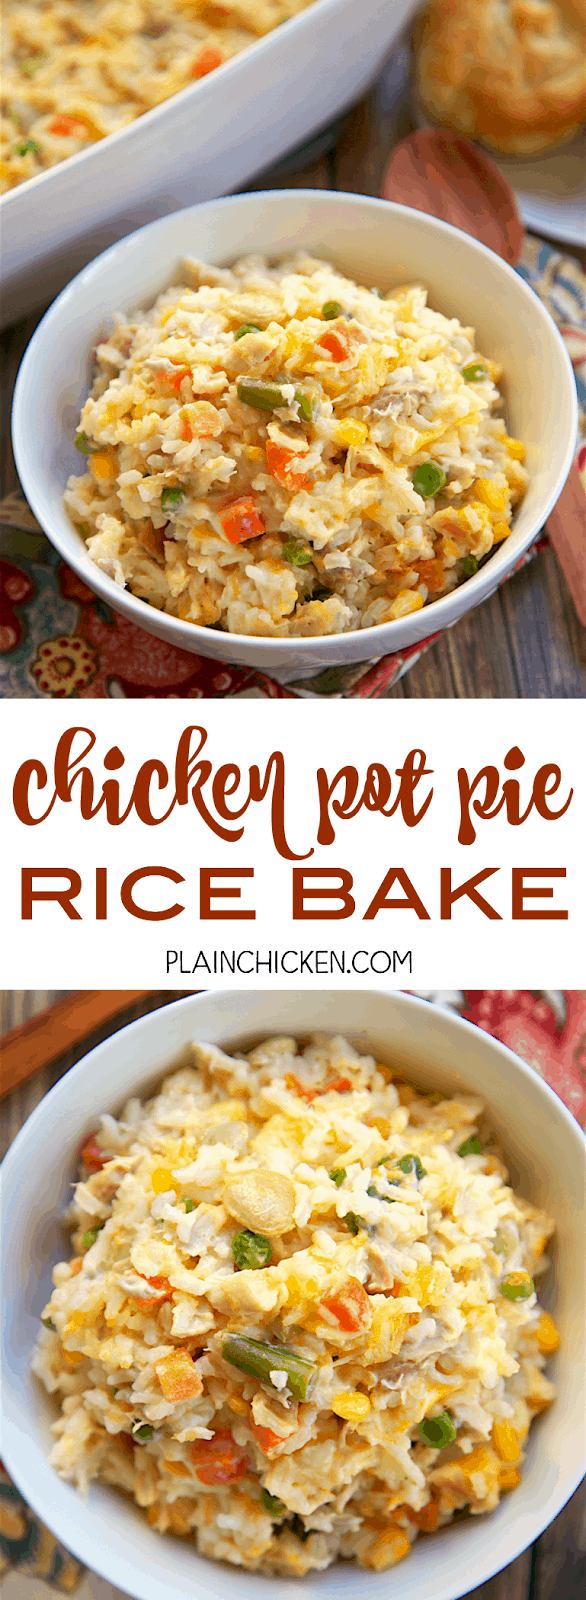 Chicken Pot Pie Rice Bake - chicken, mixed vegetables, cheddar, cream of chicken, sour cream and rice. Ready in 30 minutes! A whole meal in one pan. No need for extra sides!! We love to serve this with some buttermilk biscuits to complete the meal. Everyone loves this easy casserole dish!